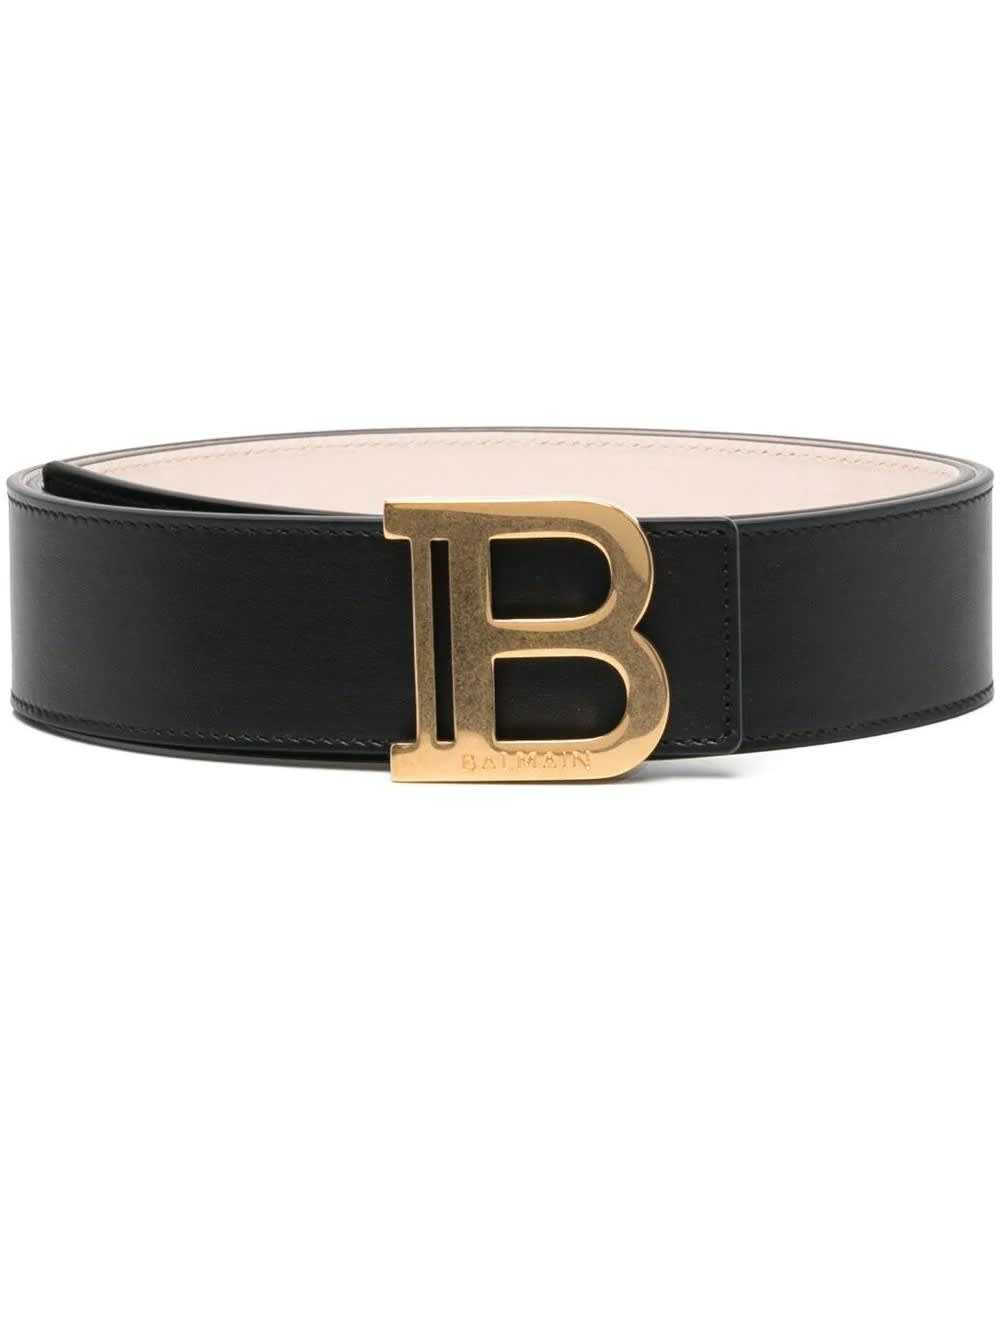 BALMAIN WOMAN BLACK AND GOLD B BELT IN SMOOTH LEATHER 4CM